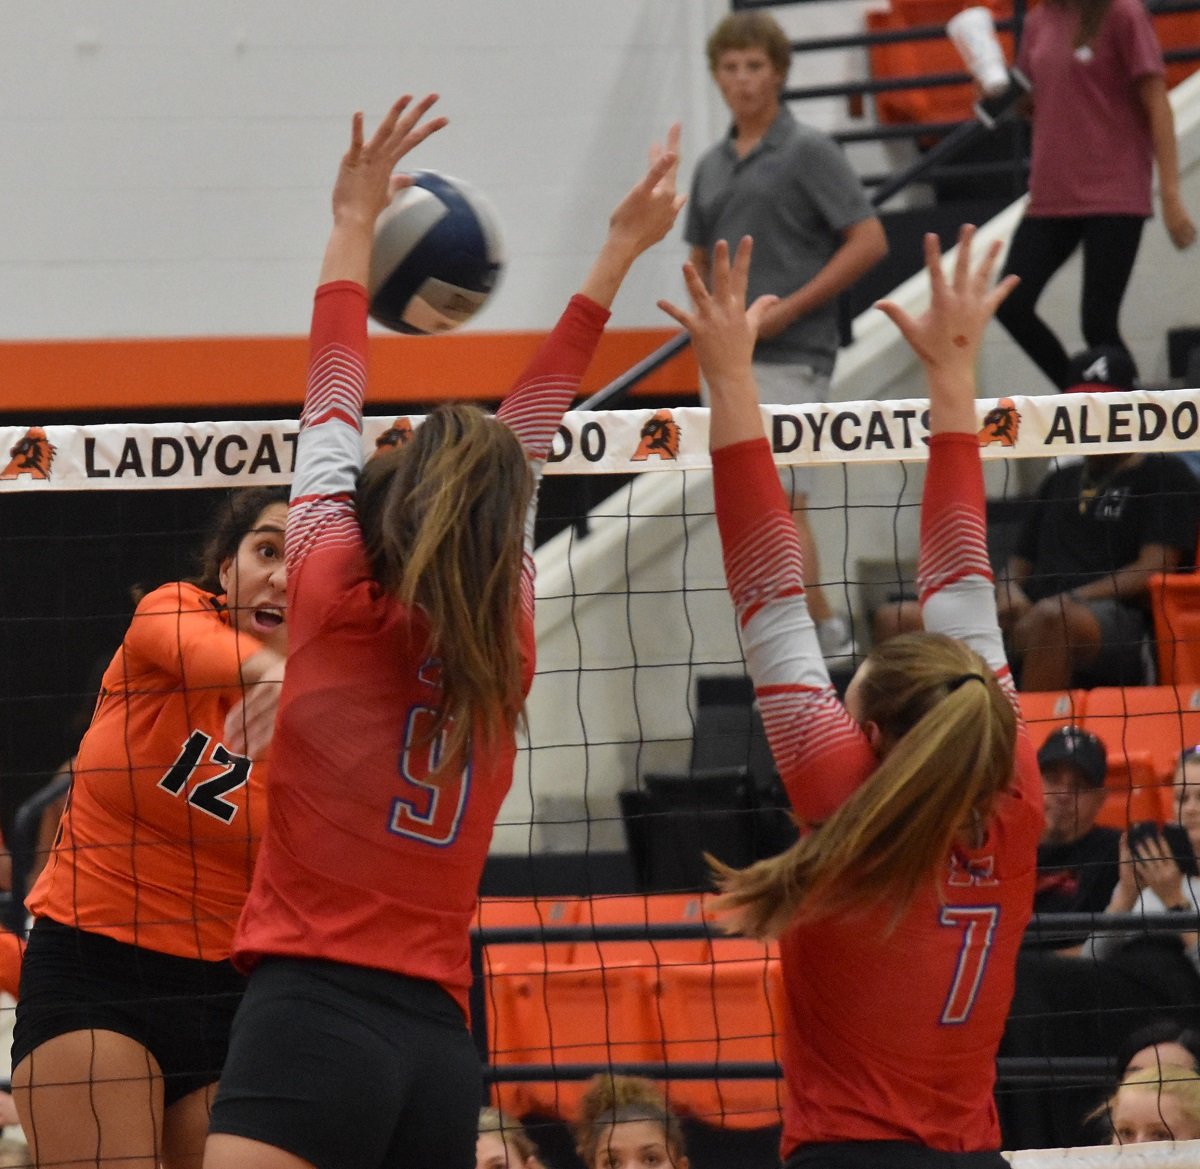 Aledo hitter Evelyn Torres slams a spike for a kill during the Ladycats' 3-1 victory over Midlothian Heritage Friday at the Aledo High School gym. Photo by Tony Eierdam